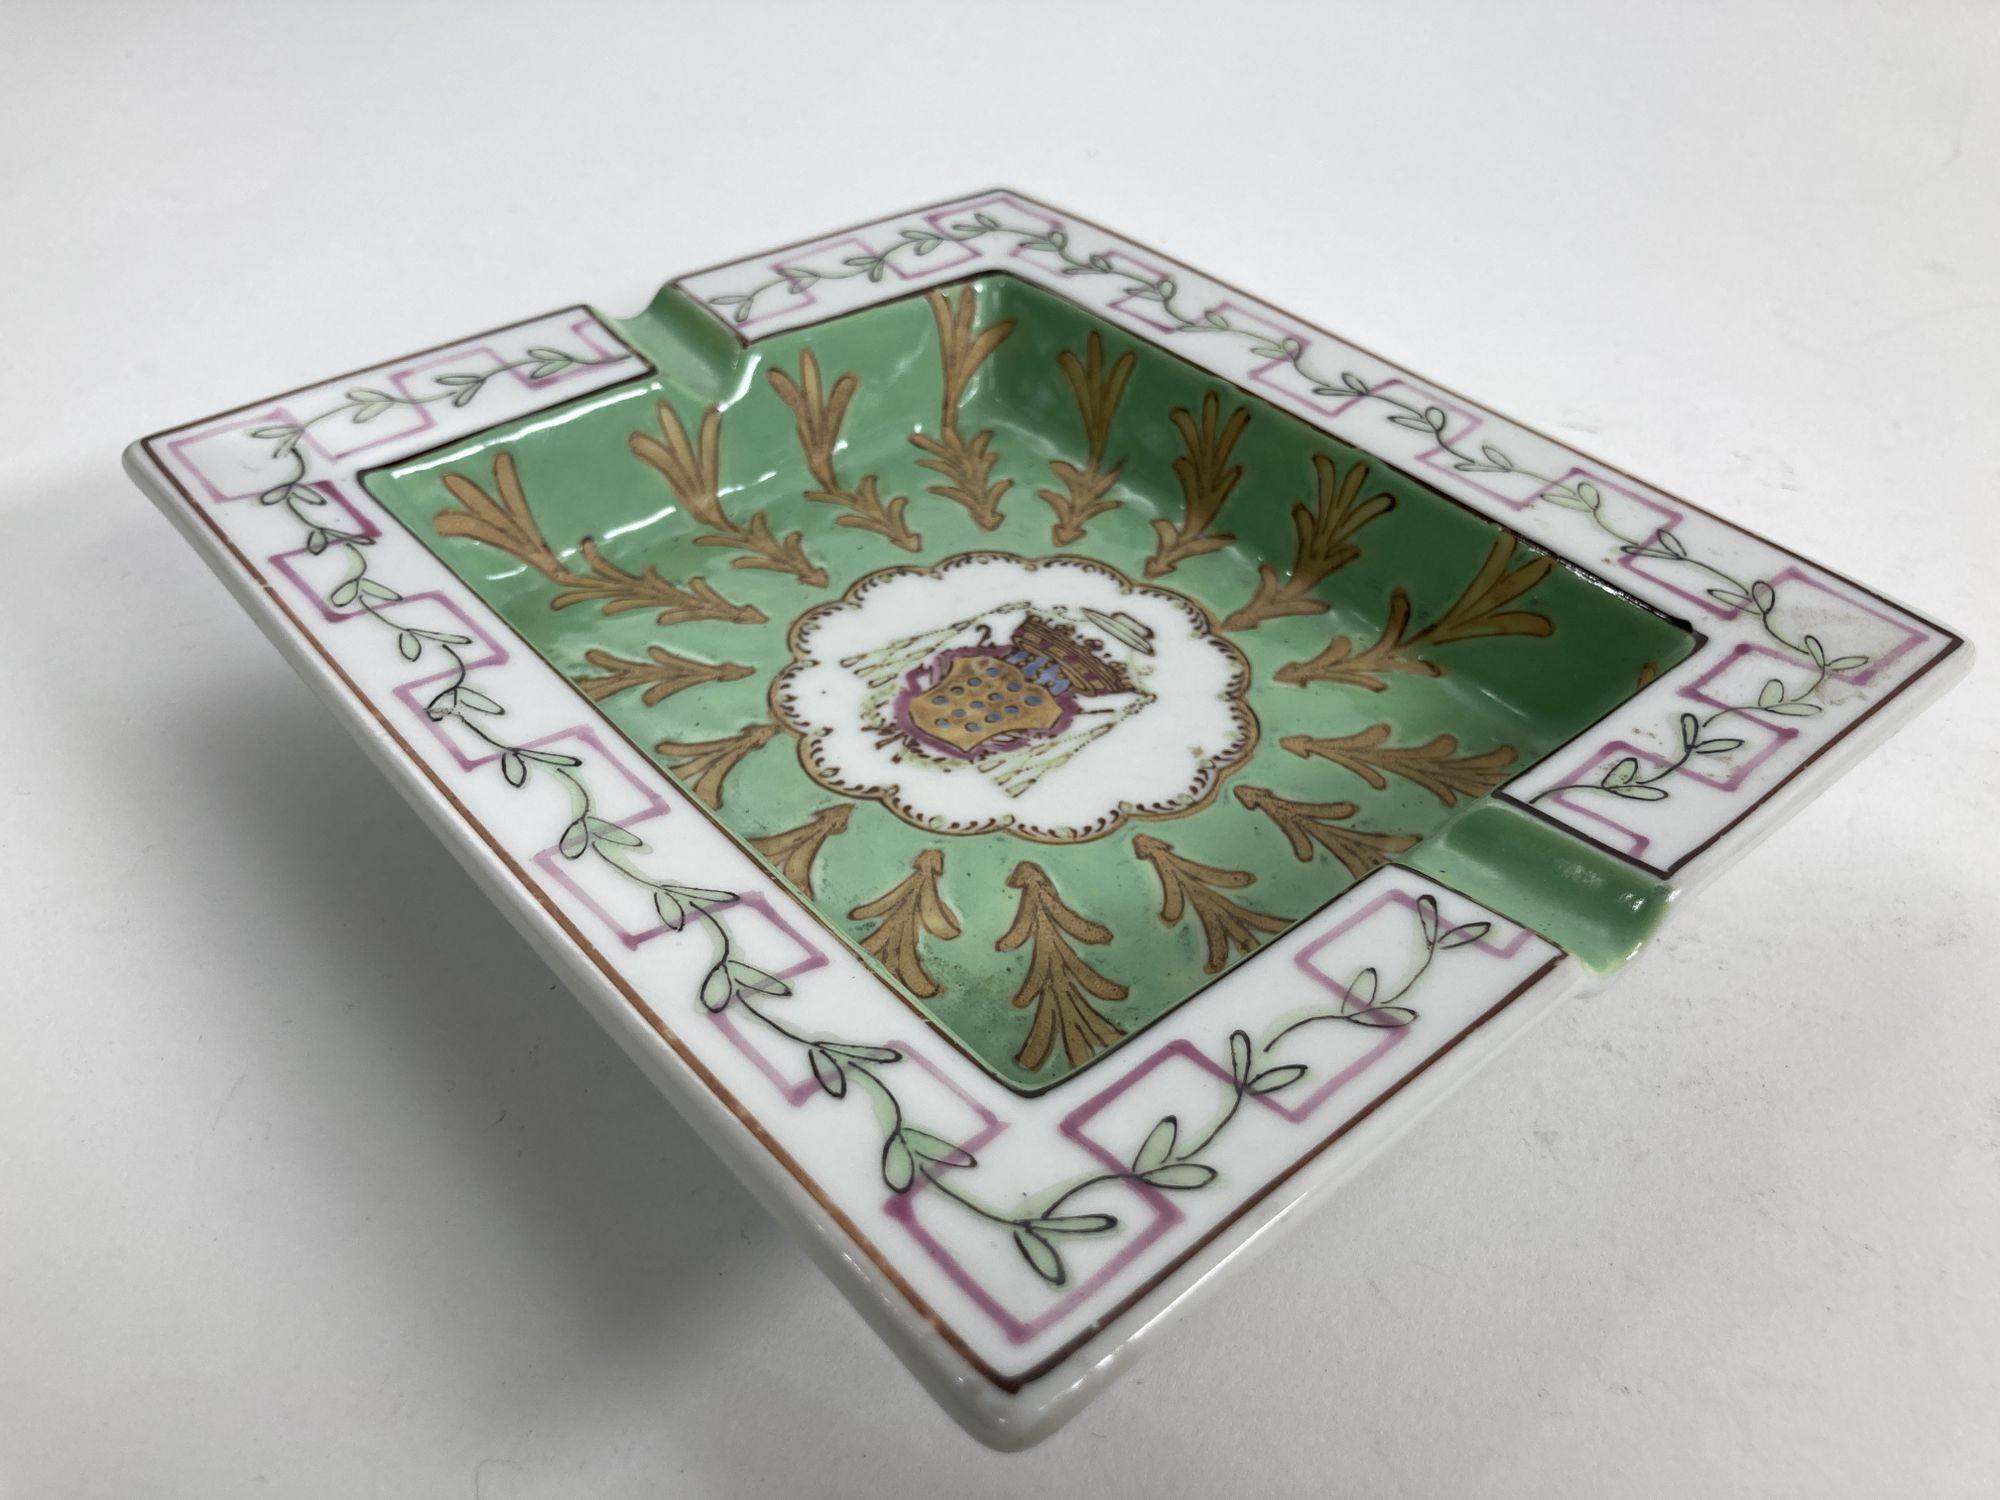 Hand-Painted Vintage Porcelain Ashtray White and Green with Coat of Arms